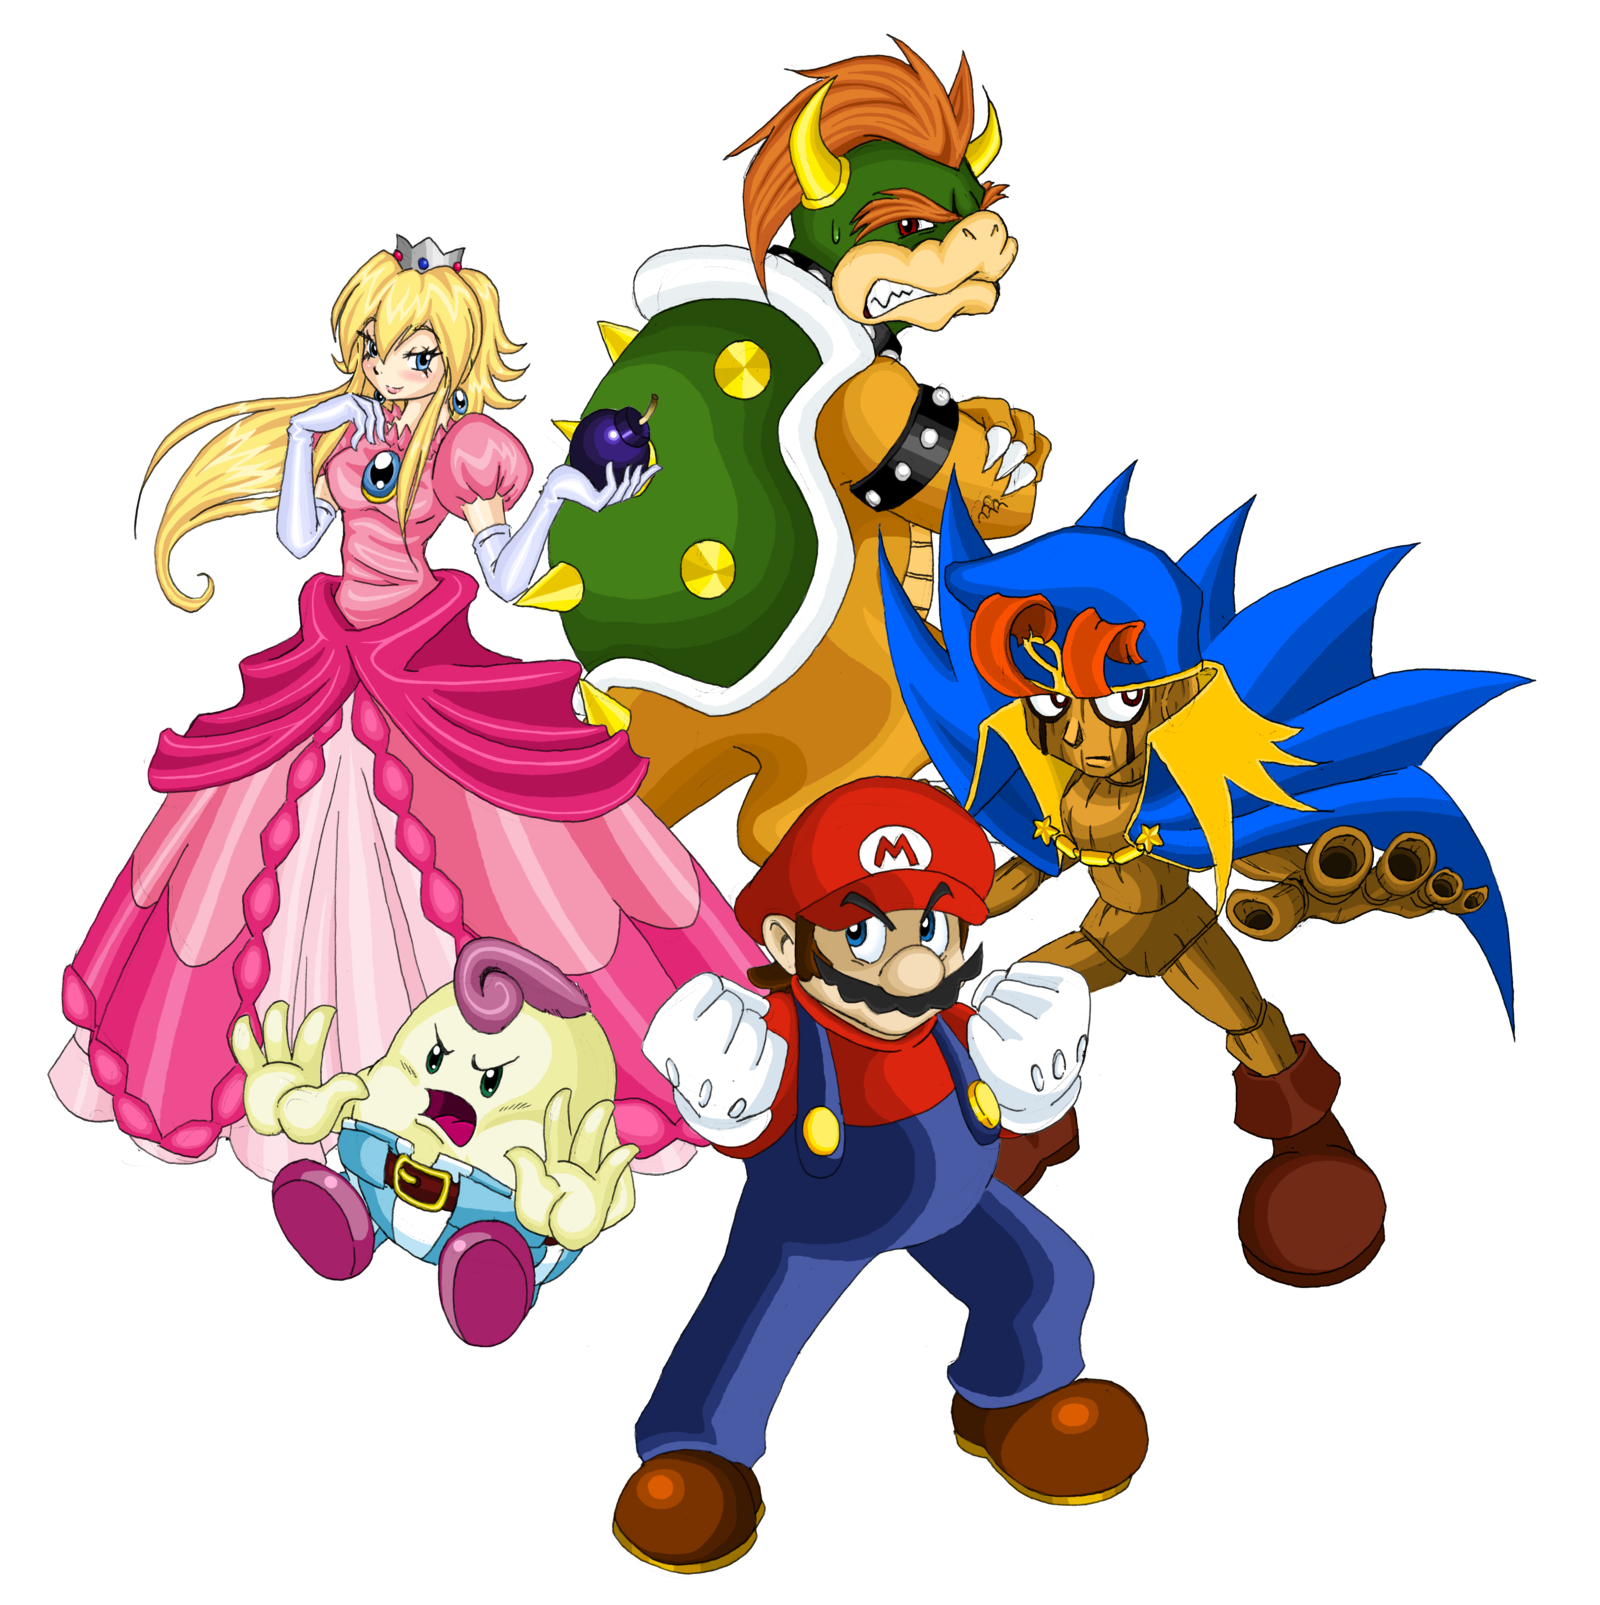 Mario RPG - Geno and Mallow by GENZOMAN on DeviantArt